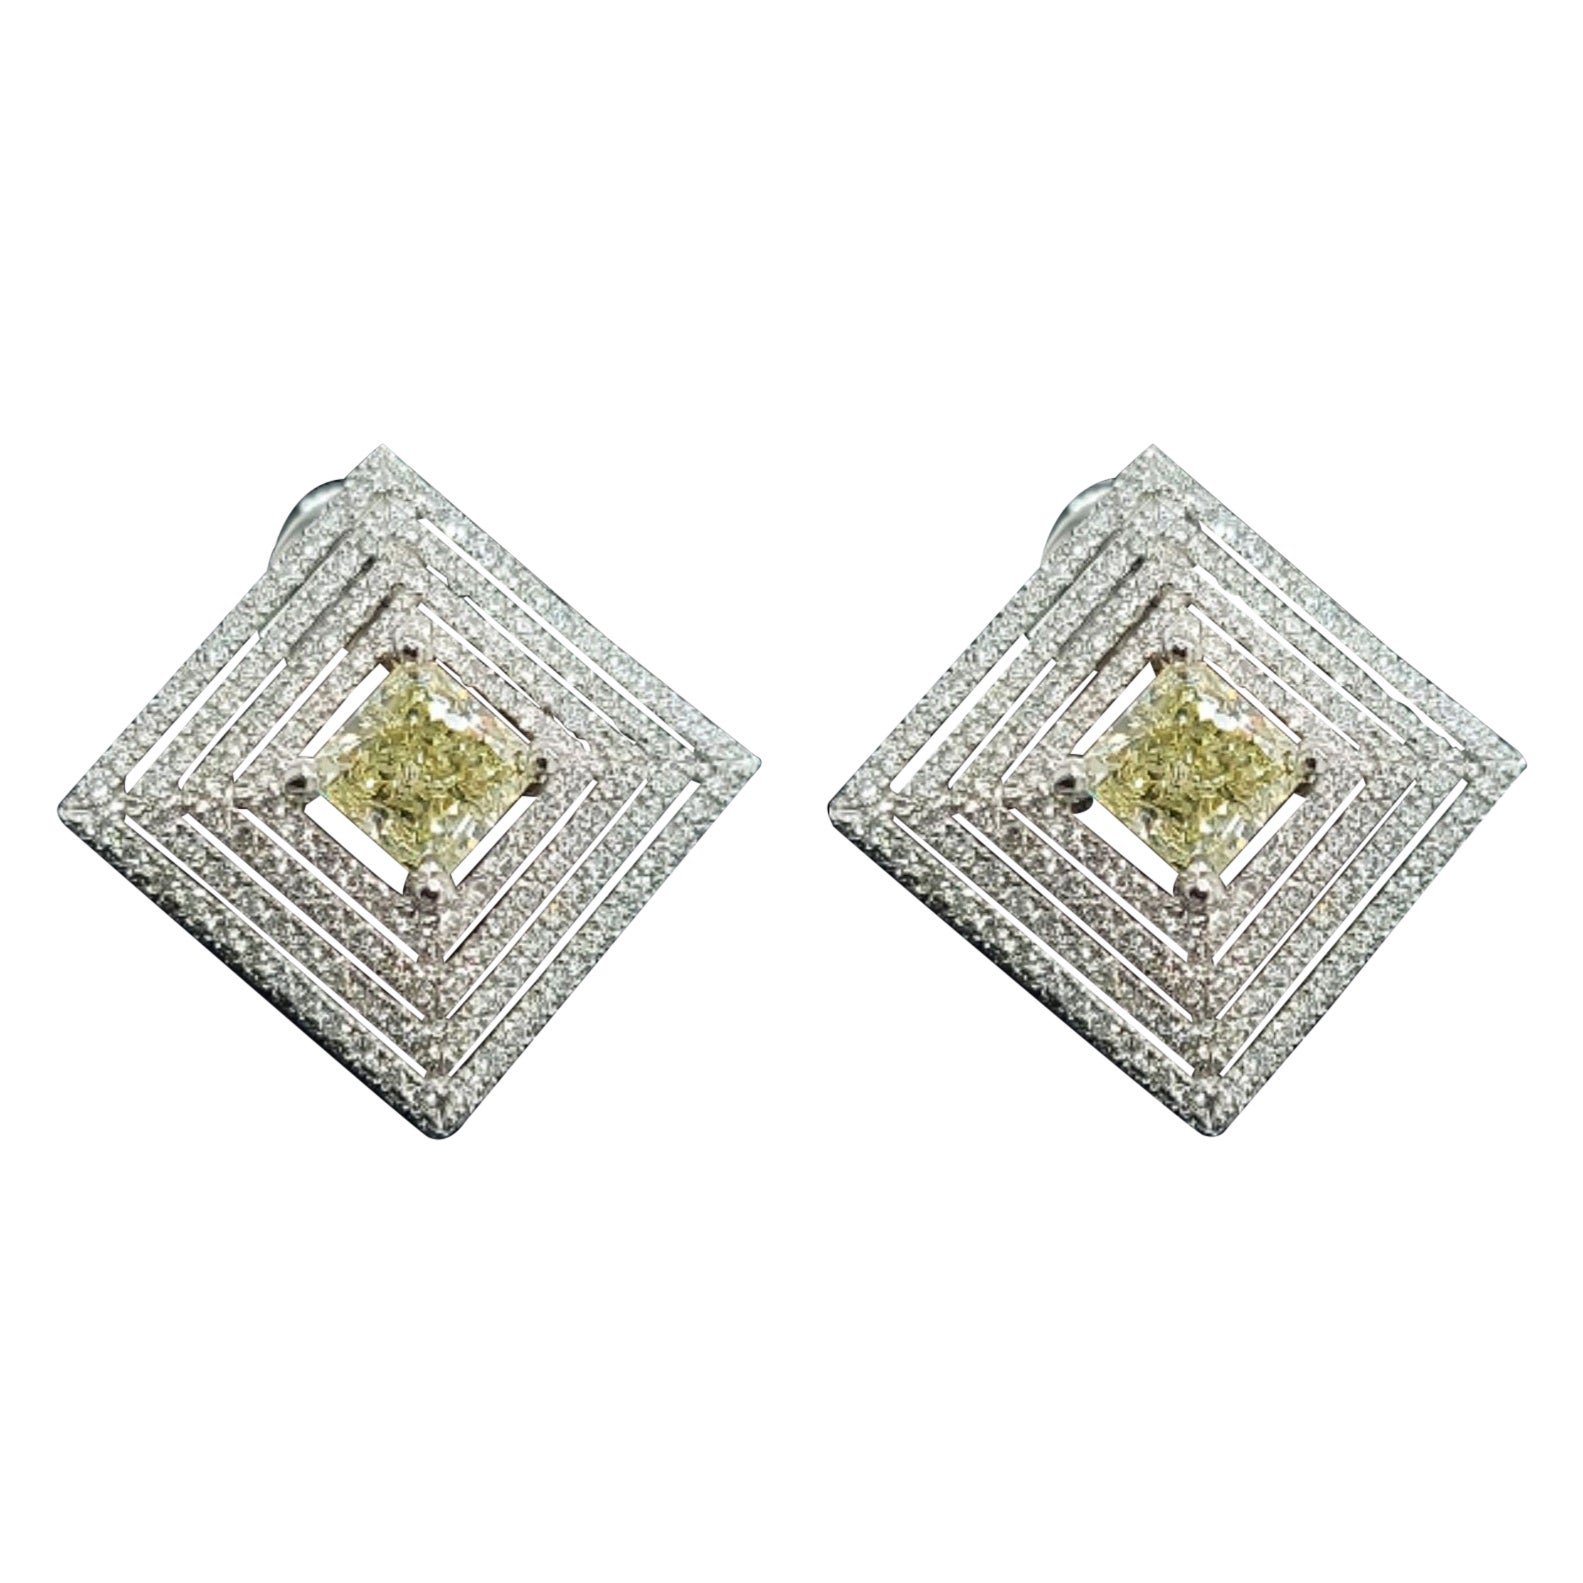 White Gold Earrings with 2.02ct Fancy Yellow Center Diamond & 1.66ct Diamonds